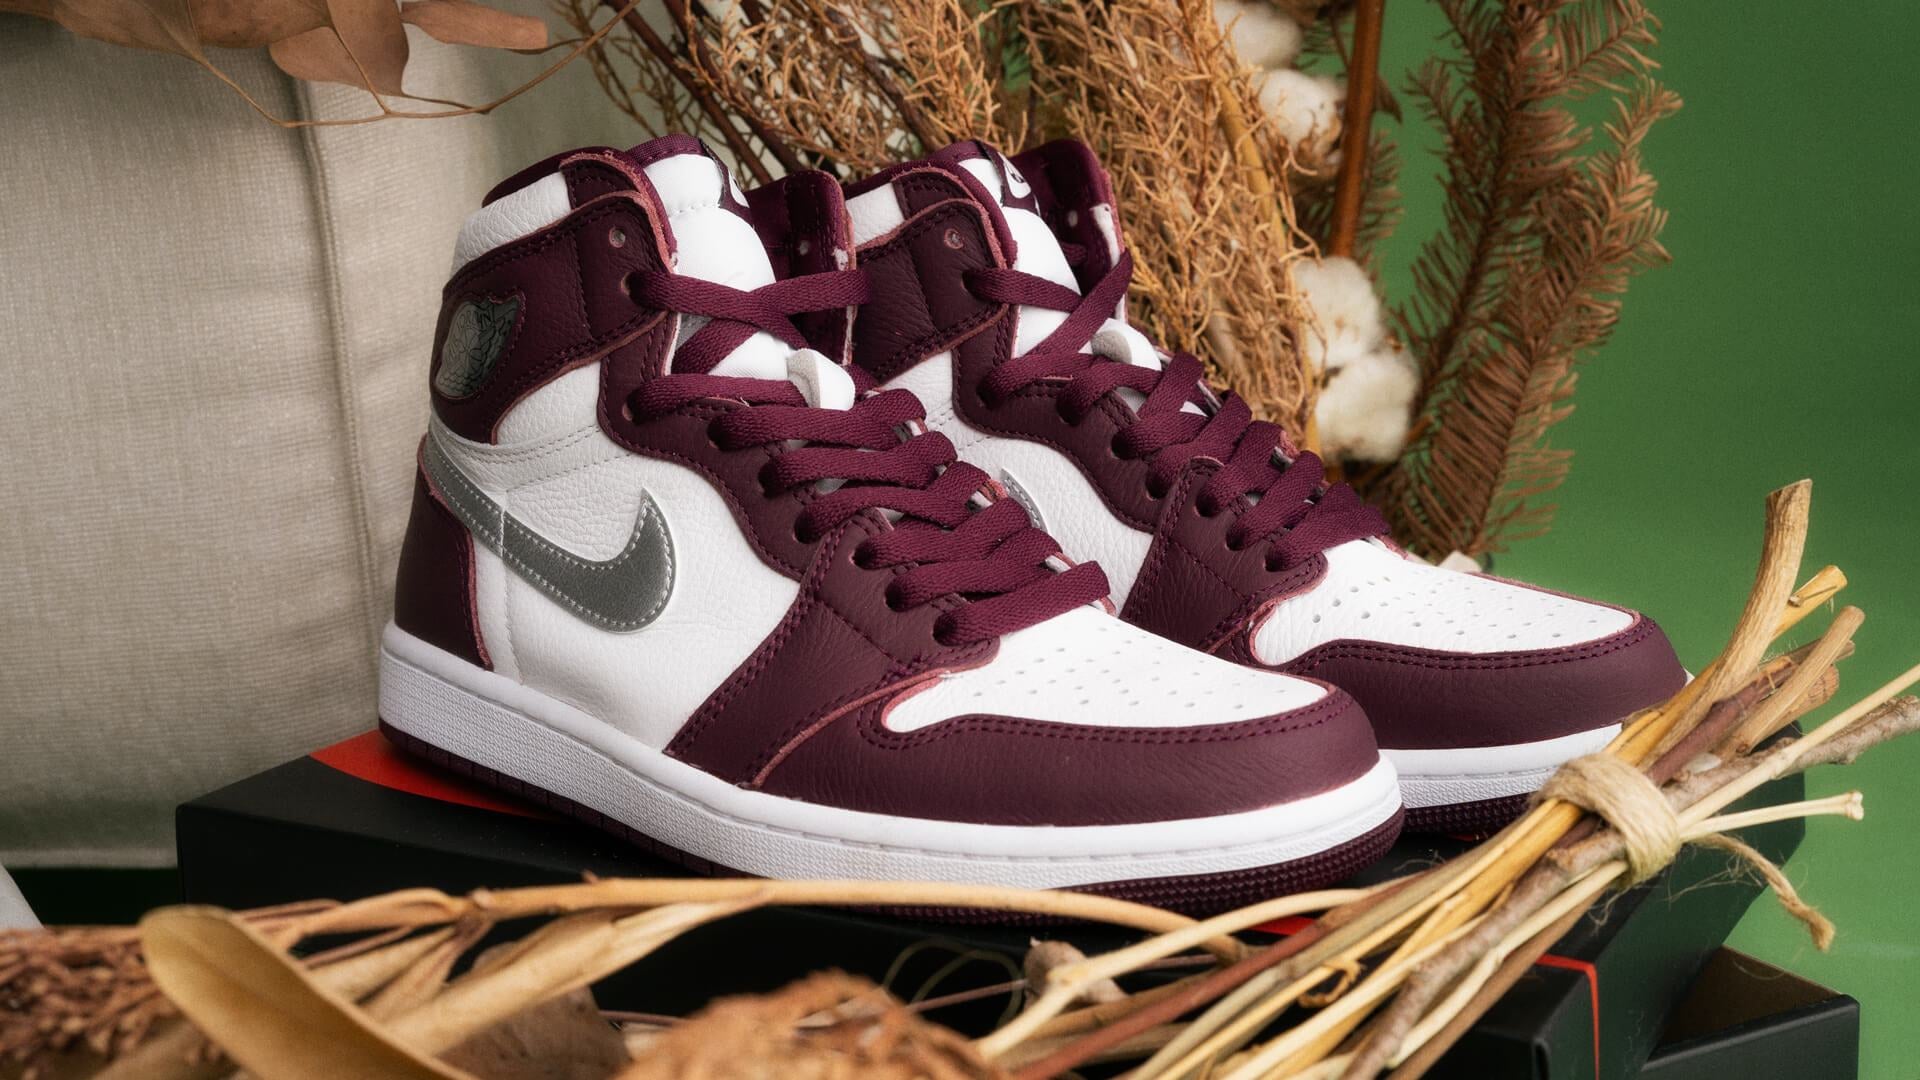 Forget-me-nots Nike Air Jordan 1 High OG “Bordeaux" with Fur Collection-Forget-me-nots Online Store